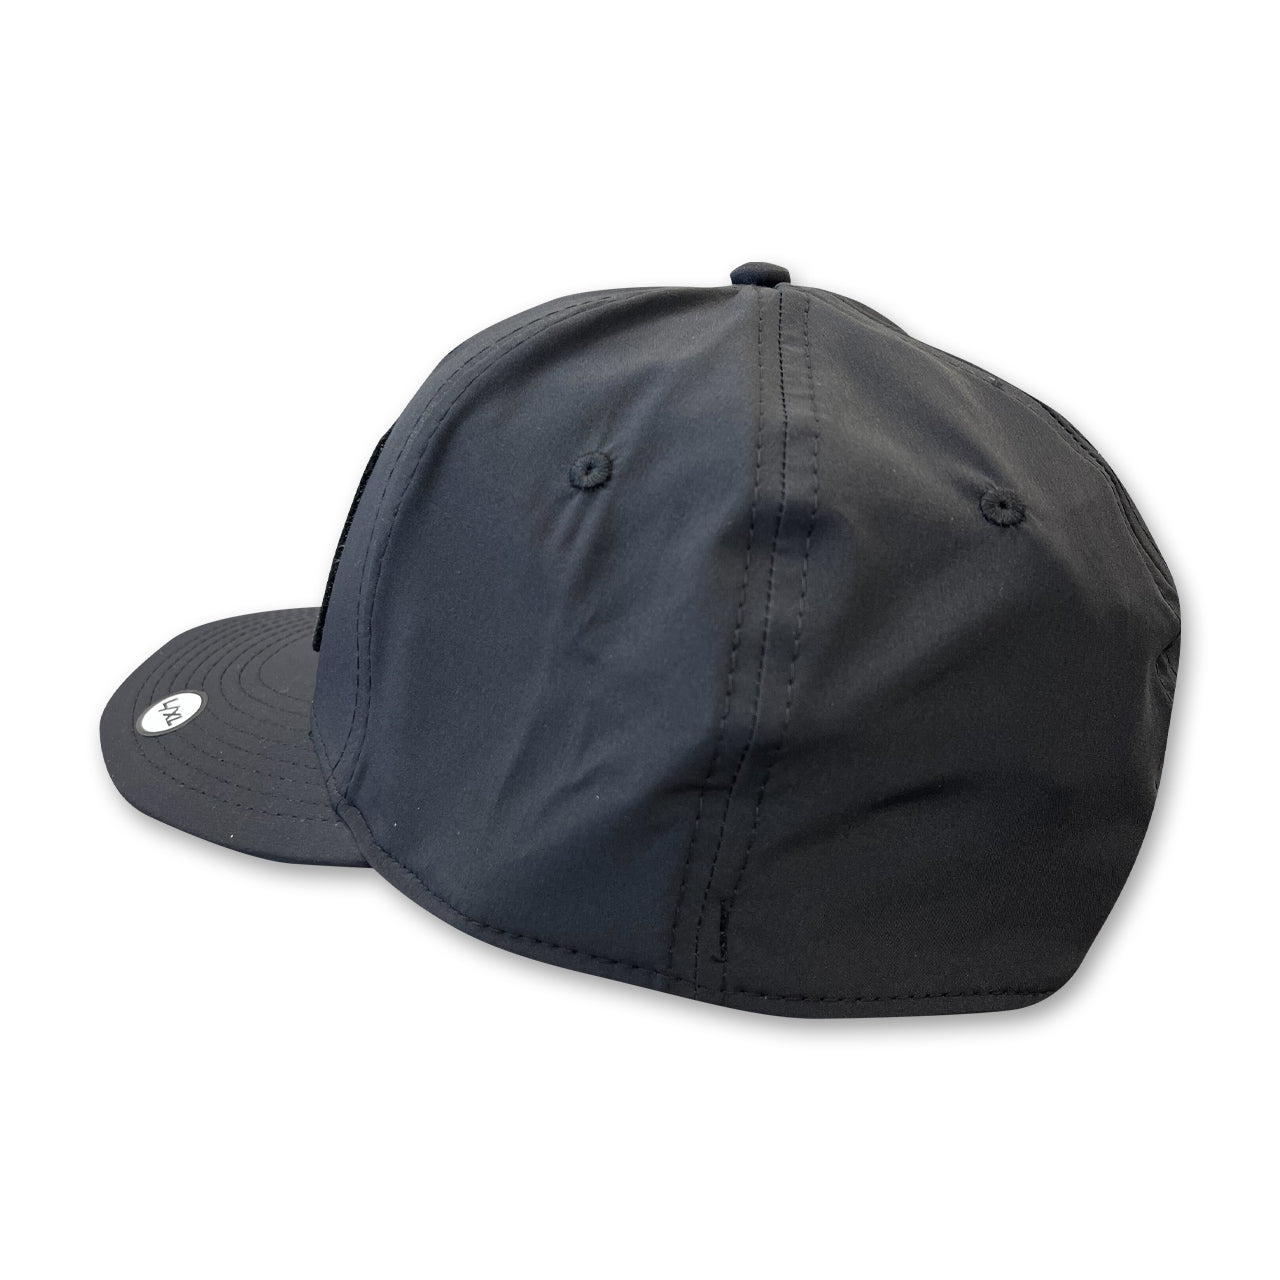 ABR Striped Patch Fitted Hat - Black/Black